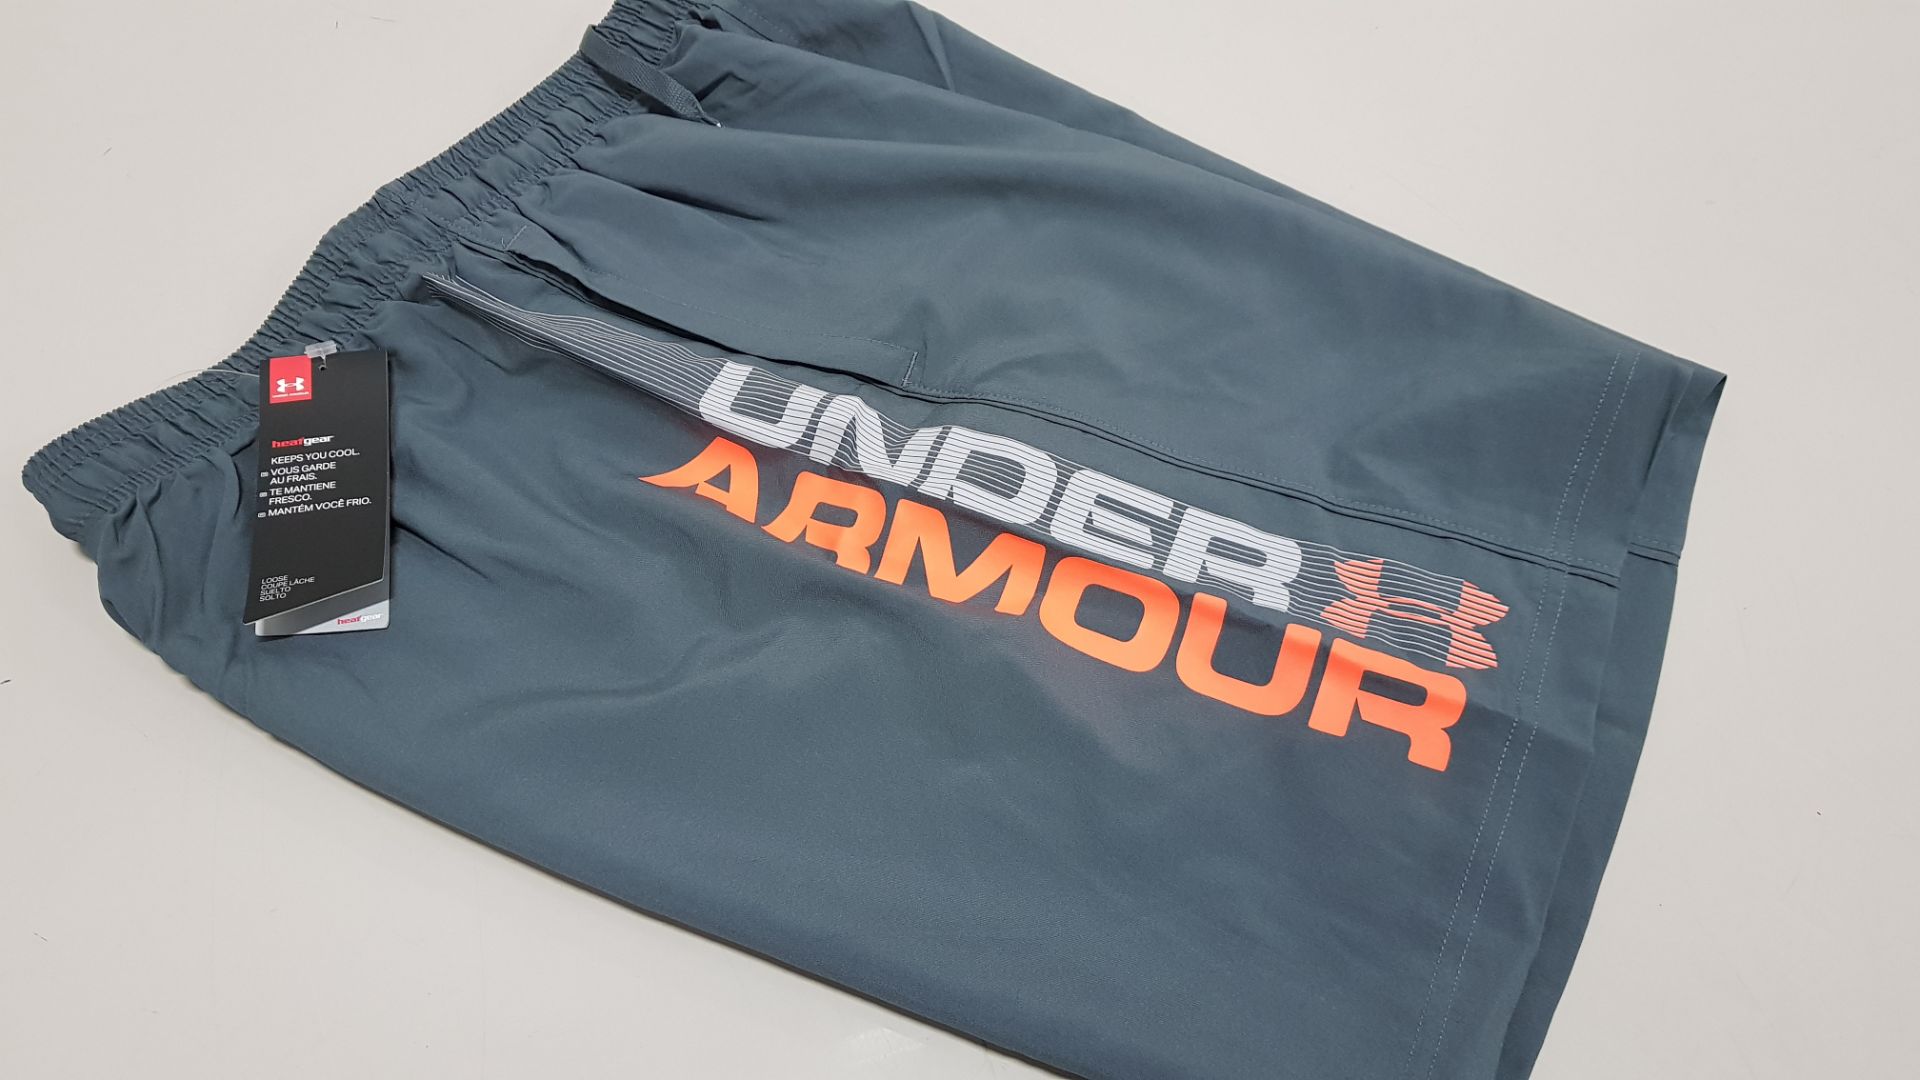 15 X BRAND NEW BAGGED UNDER ARMOUR GREY WOVEN GRAPH SHORTS IN SIZE XL - PICK LOOSE TOTAL RRP £299.